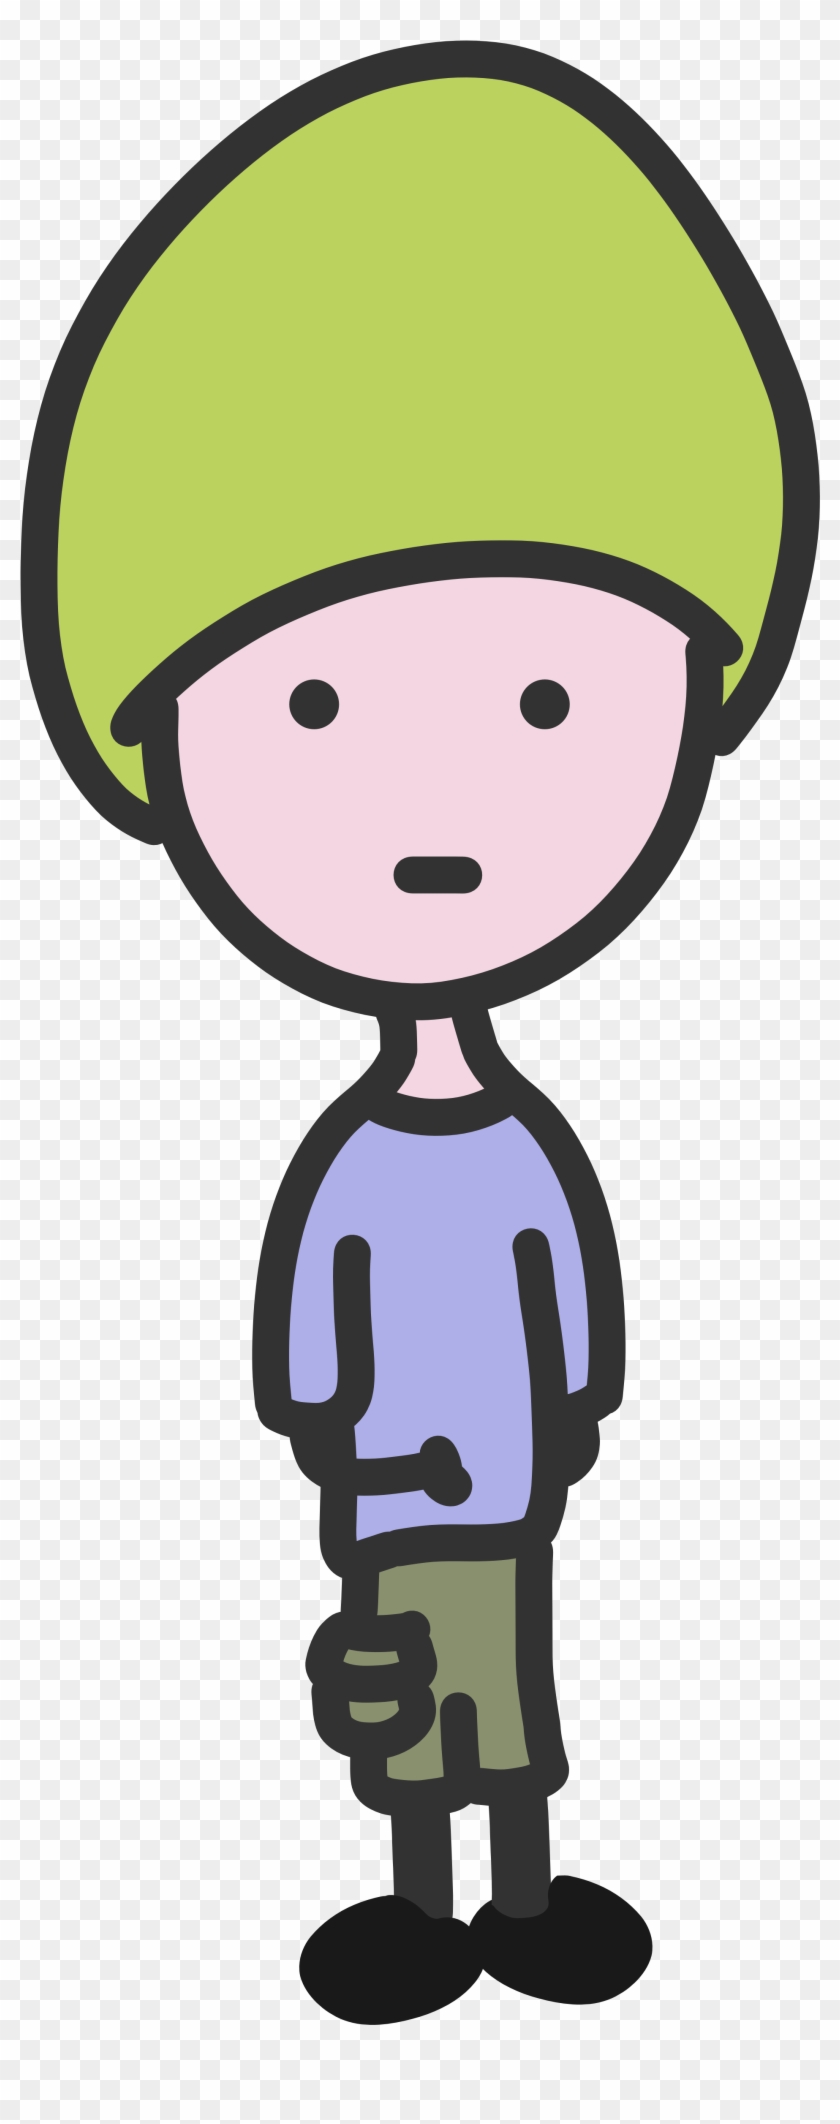 Quiet People Clipart - Pbs Kids Go - Png Download #2411595